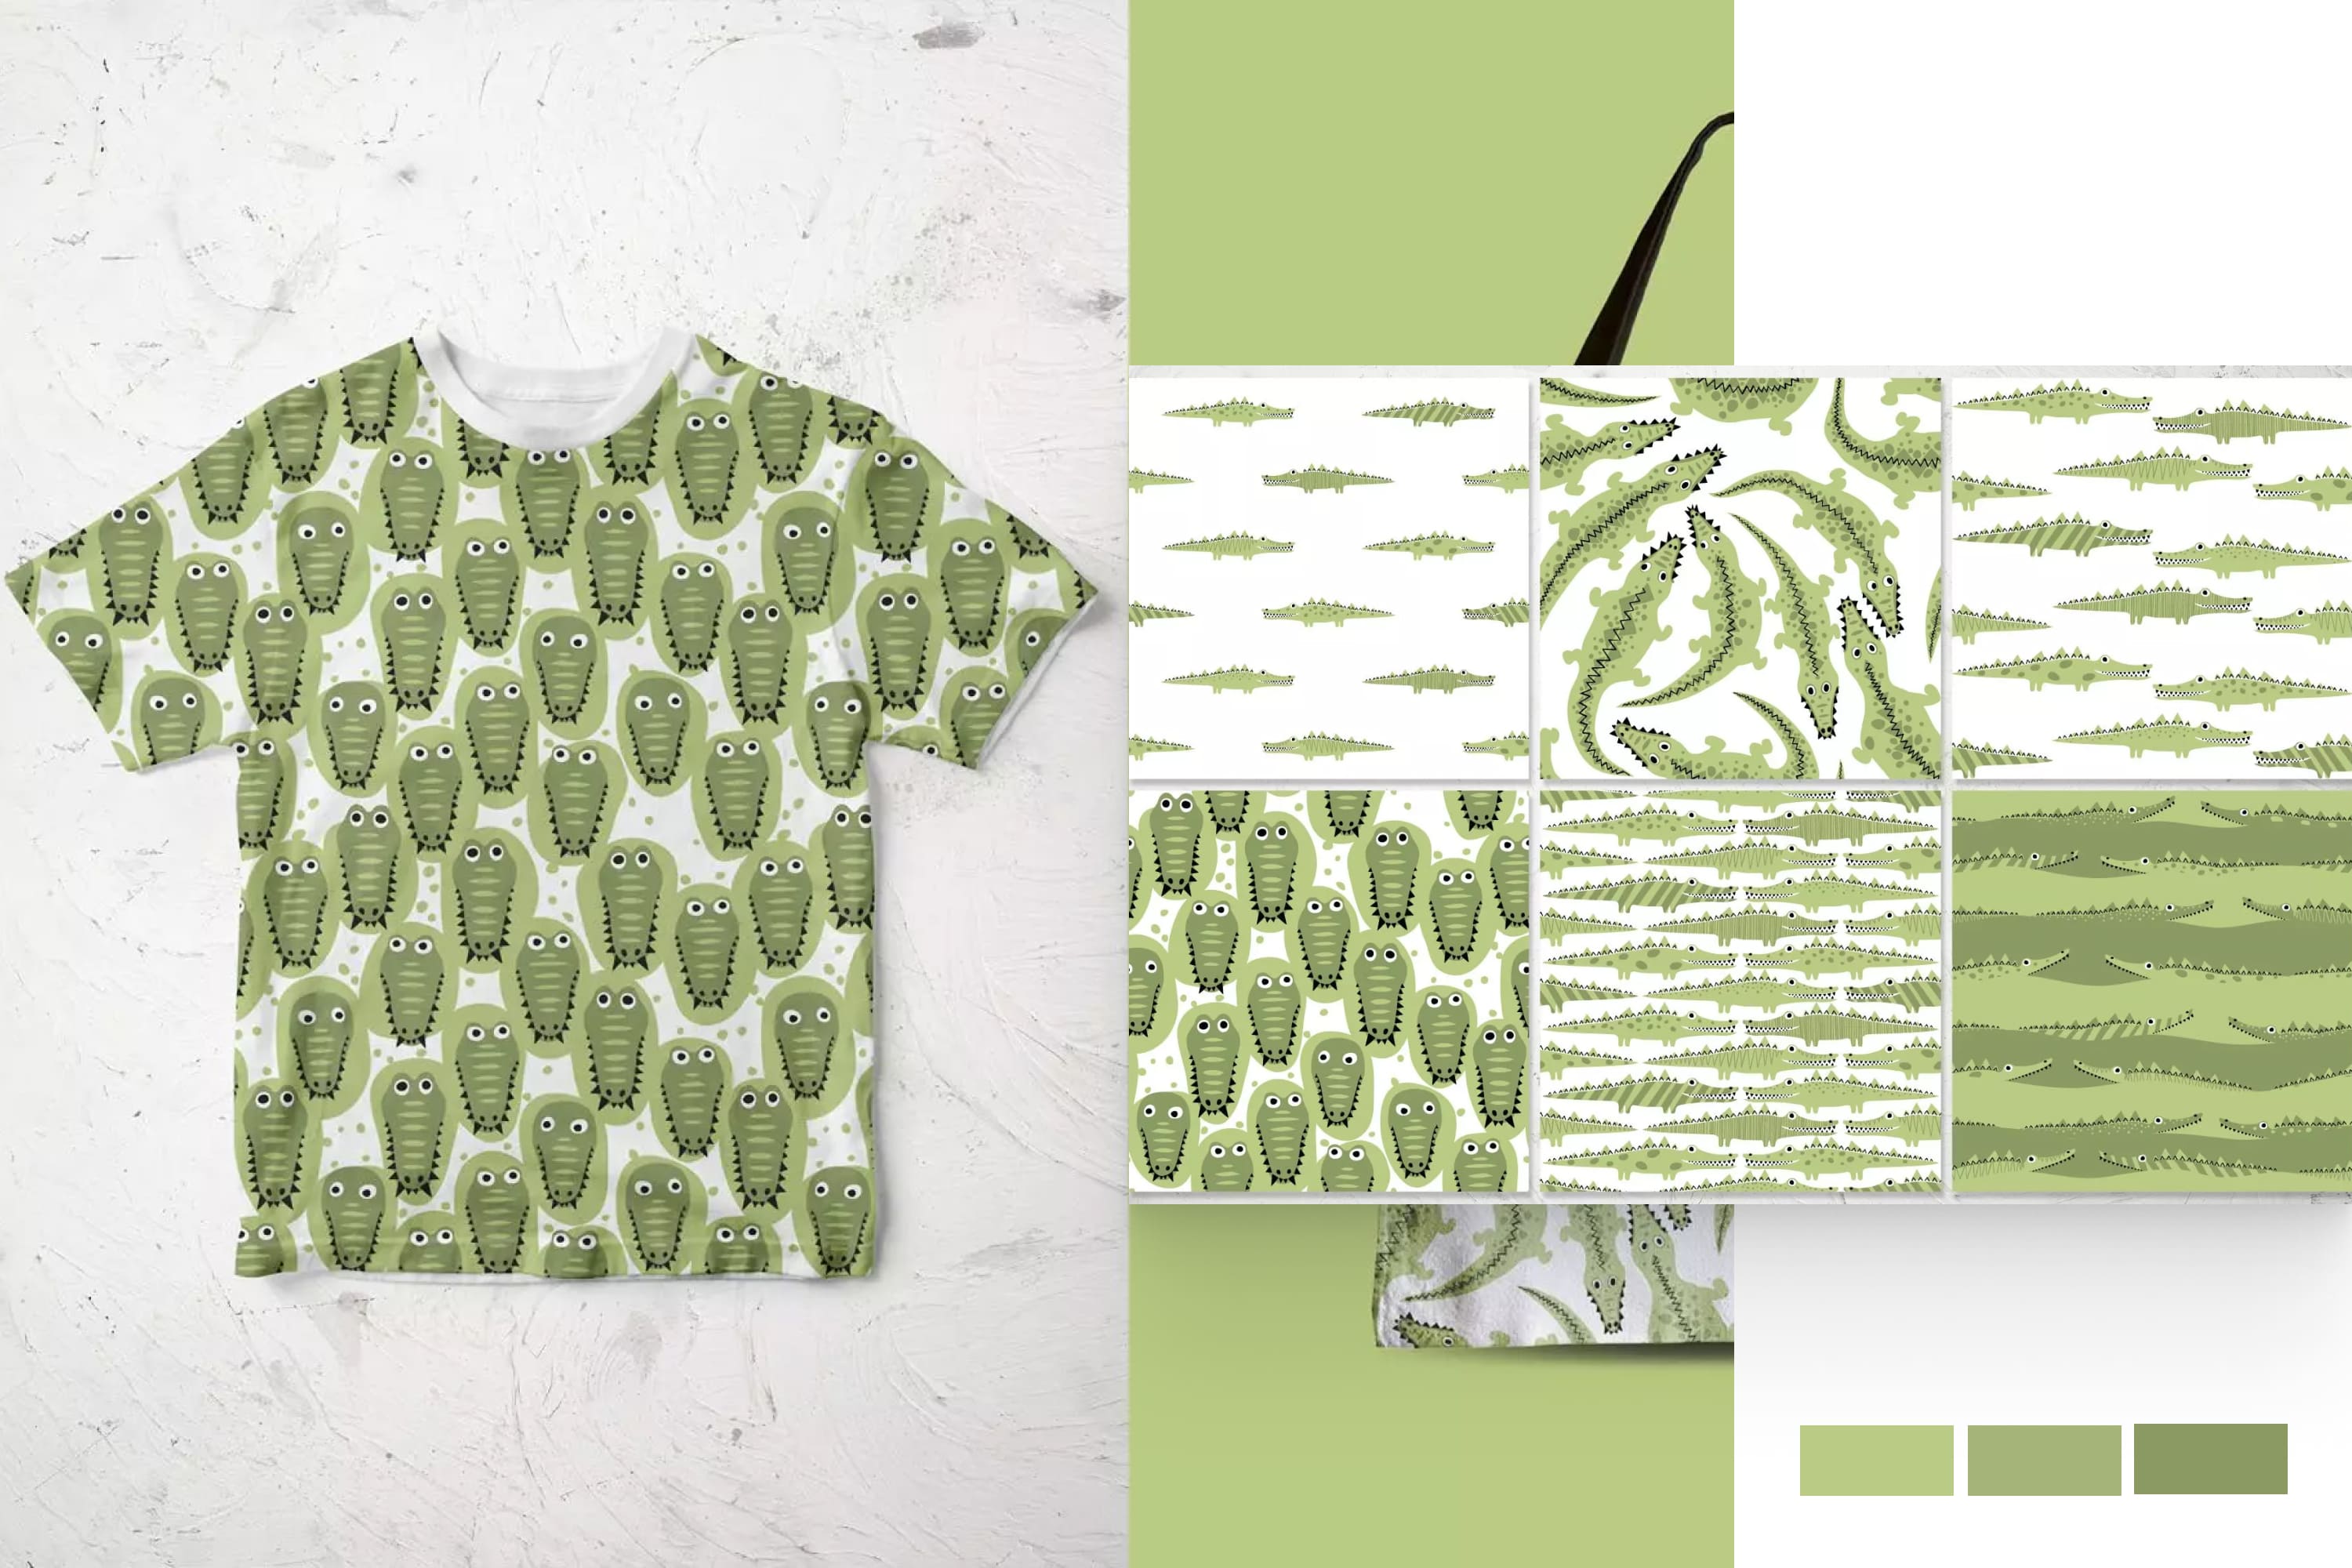 Collage of patterns with green animals.